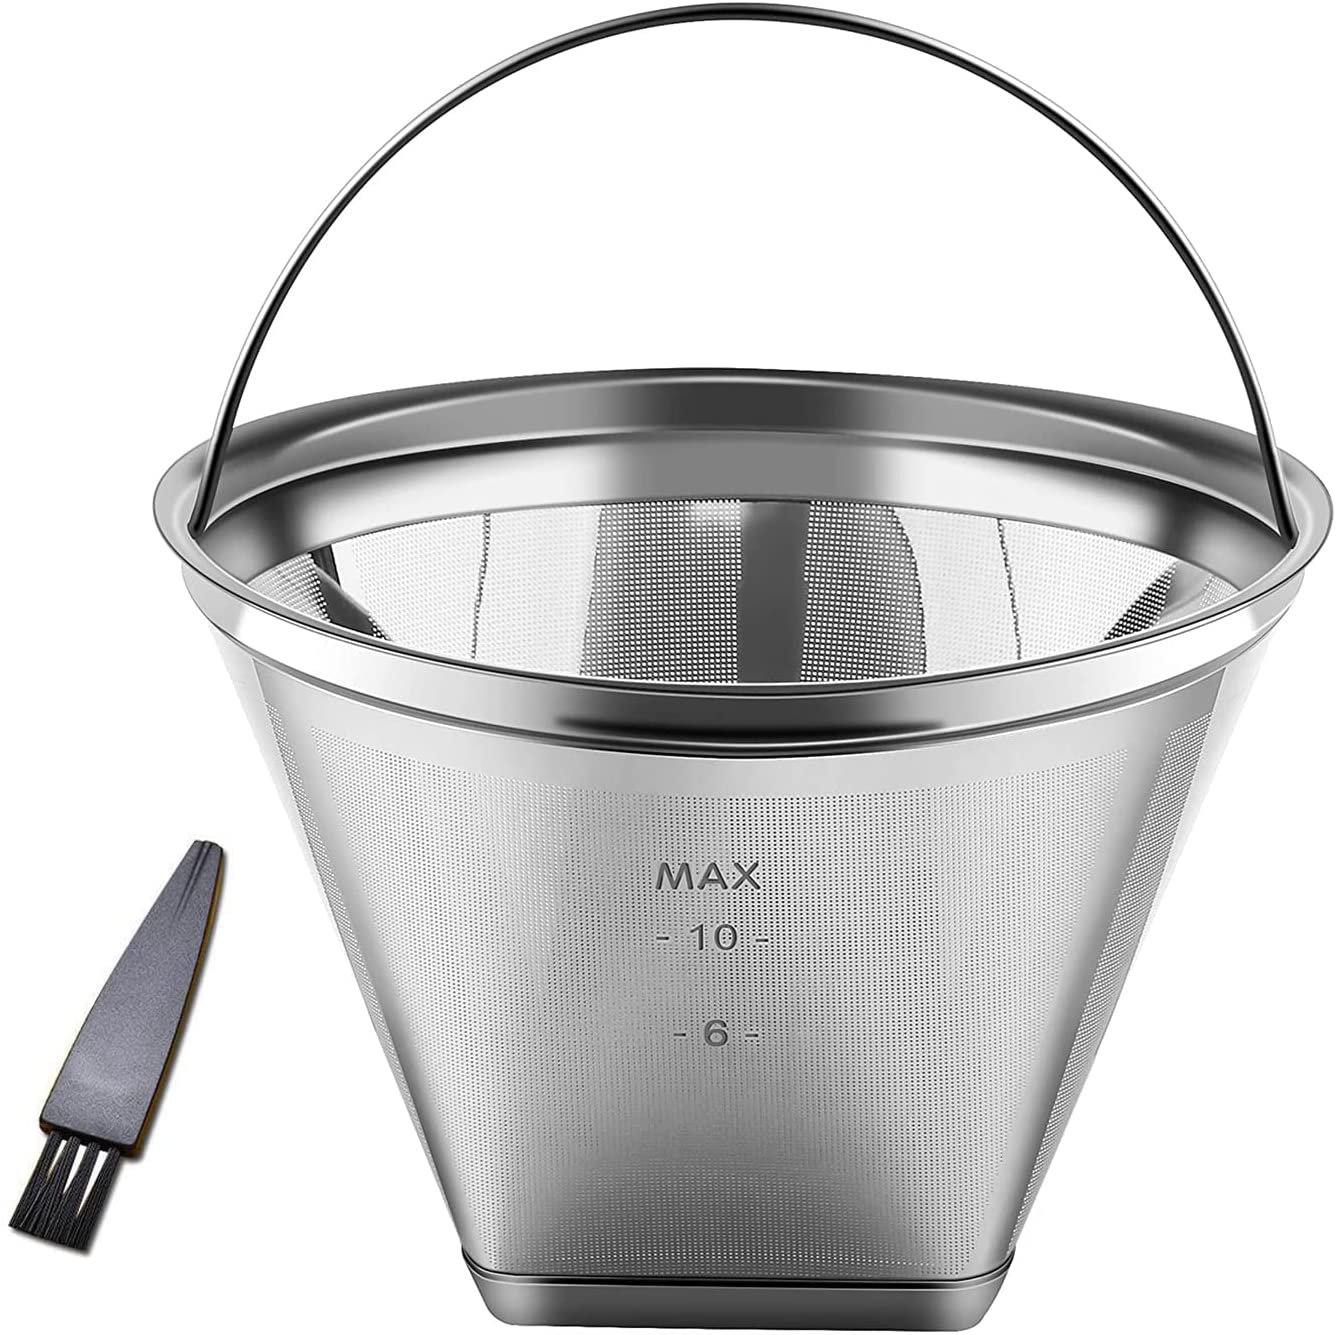 MVKV Reusable Coffee Filter No. 4 Permanent Cone Shape 6-10 Cups Stainless Steel Coffee Filter Easy to Clean with Cleaning Brush